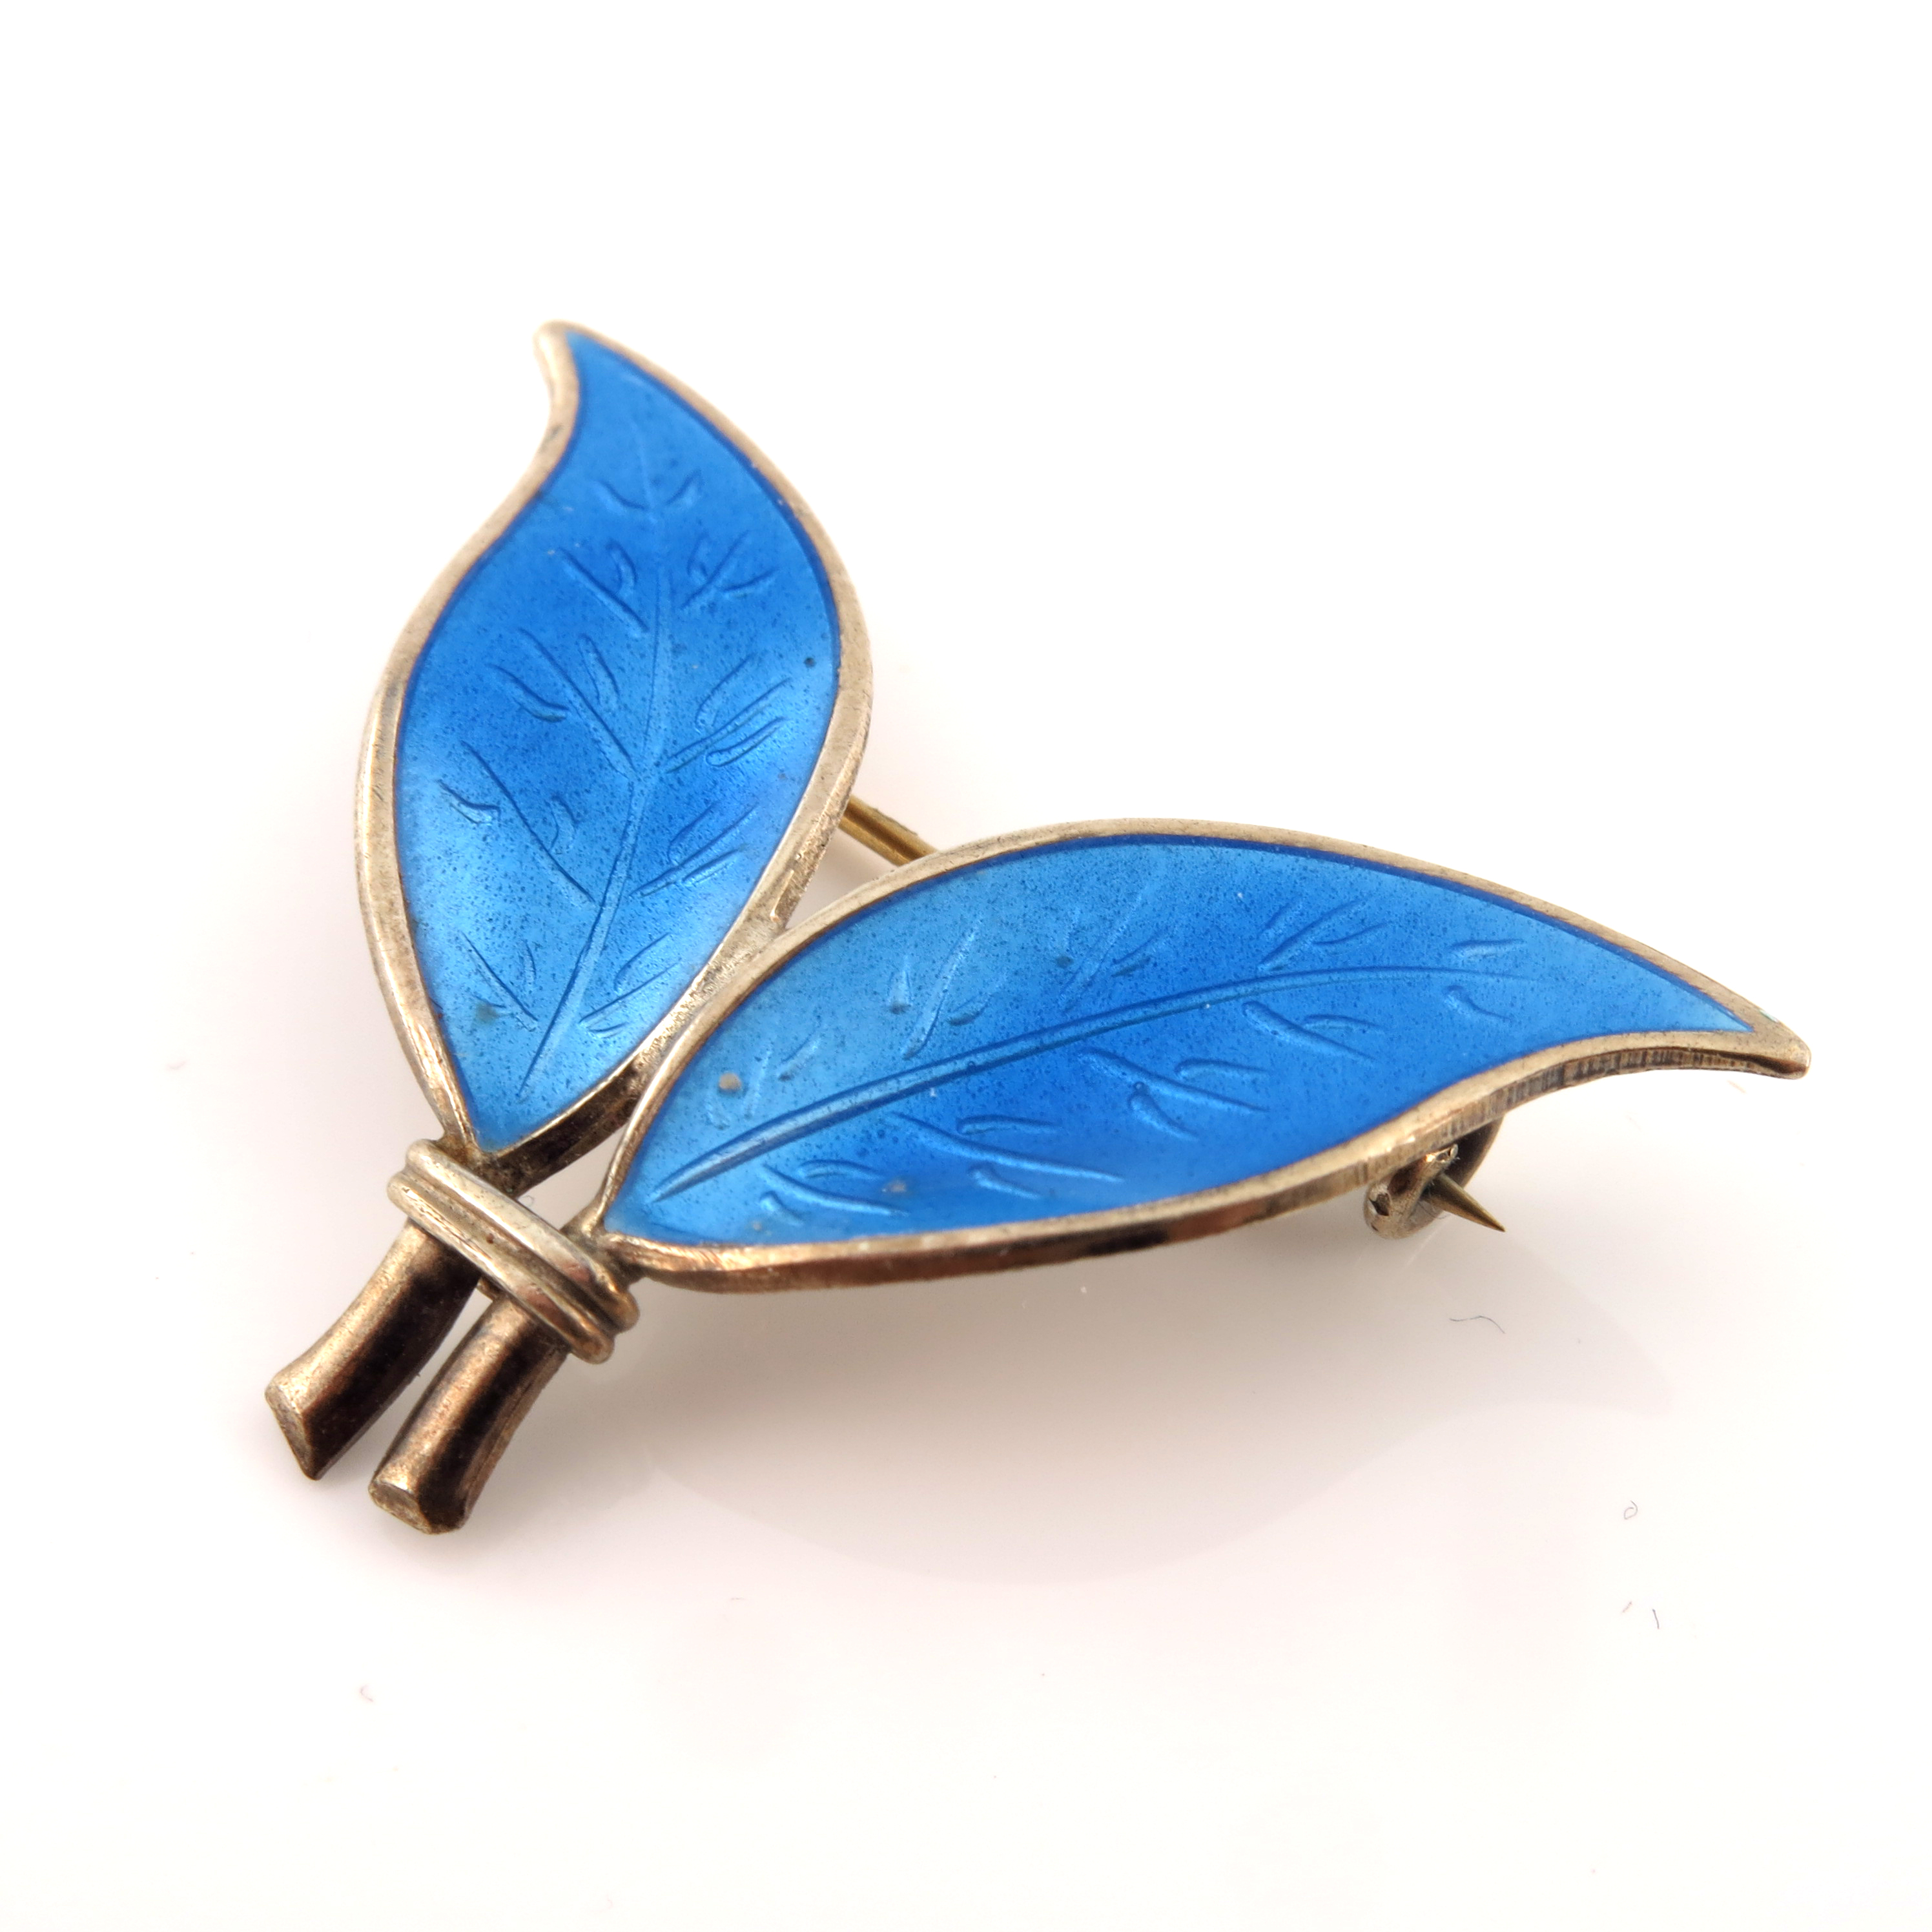 Willy Winnaess for David Andersen, a Norwegian silver gilt and enamelled two leaf brooch - Image 2 of 4